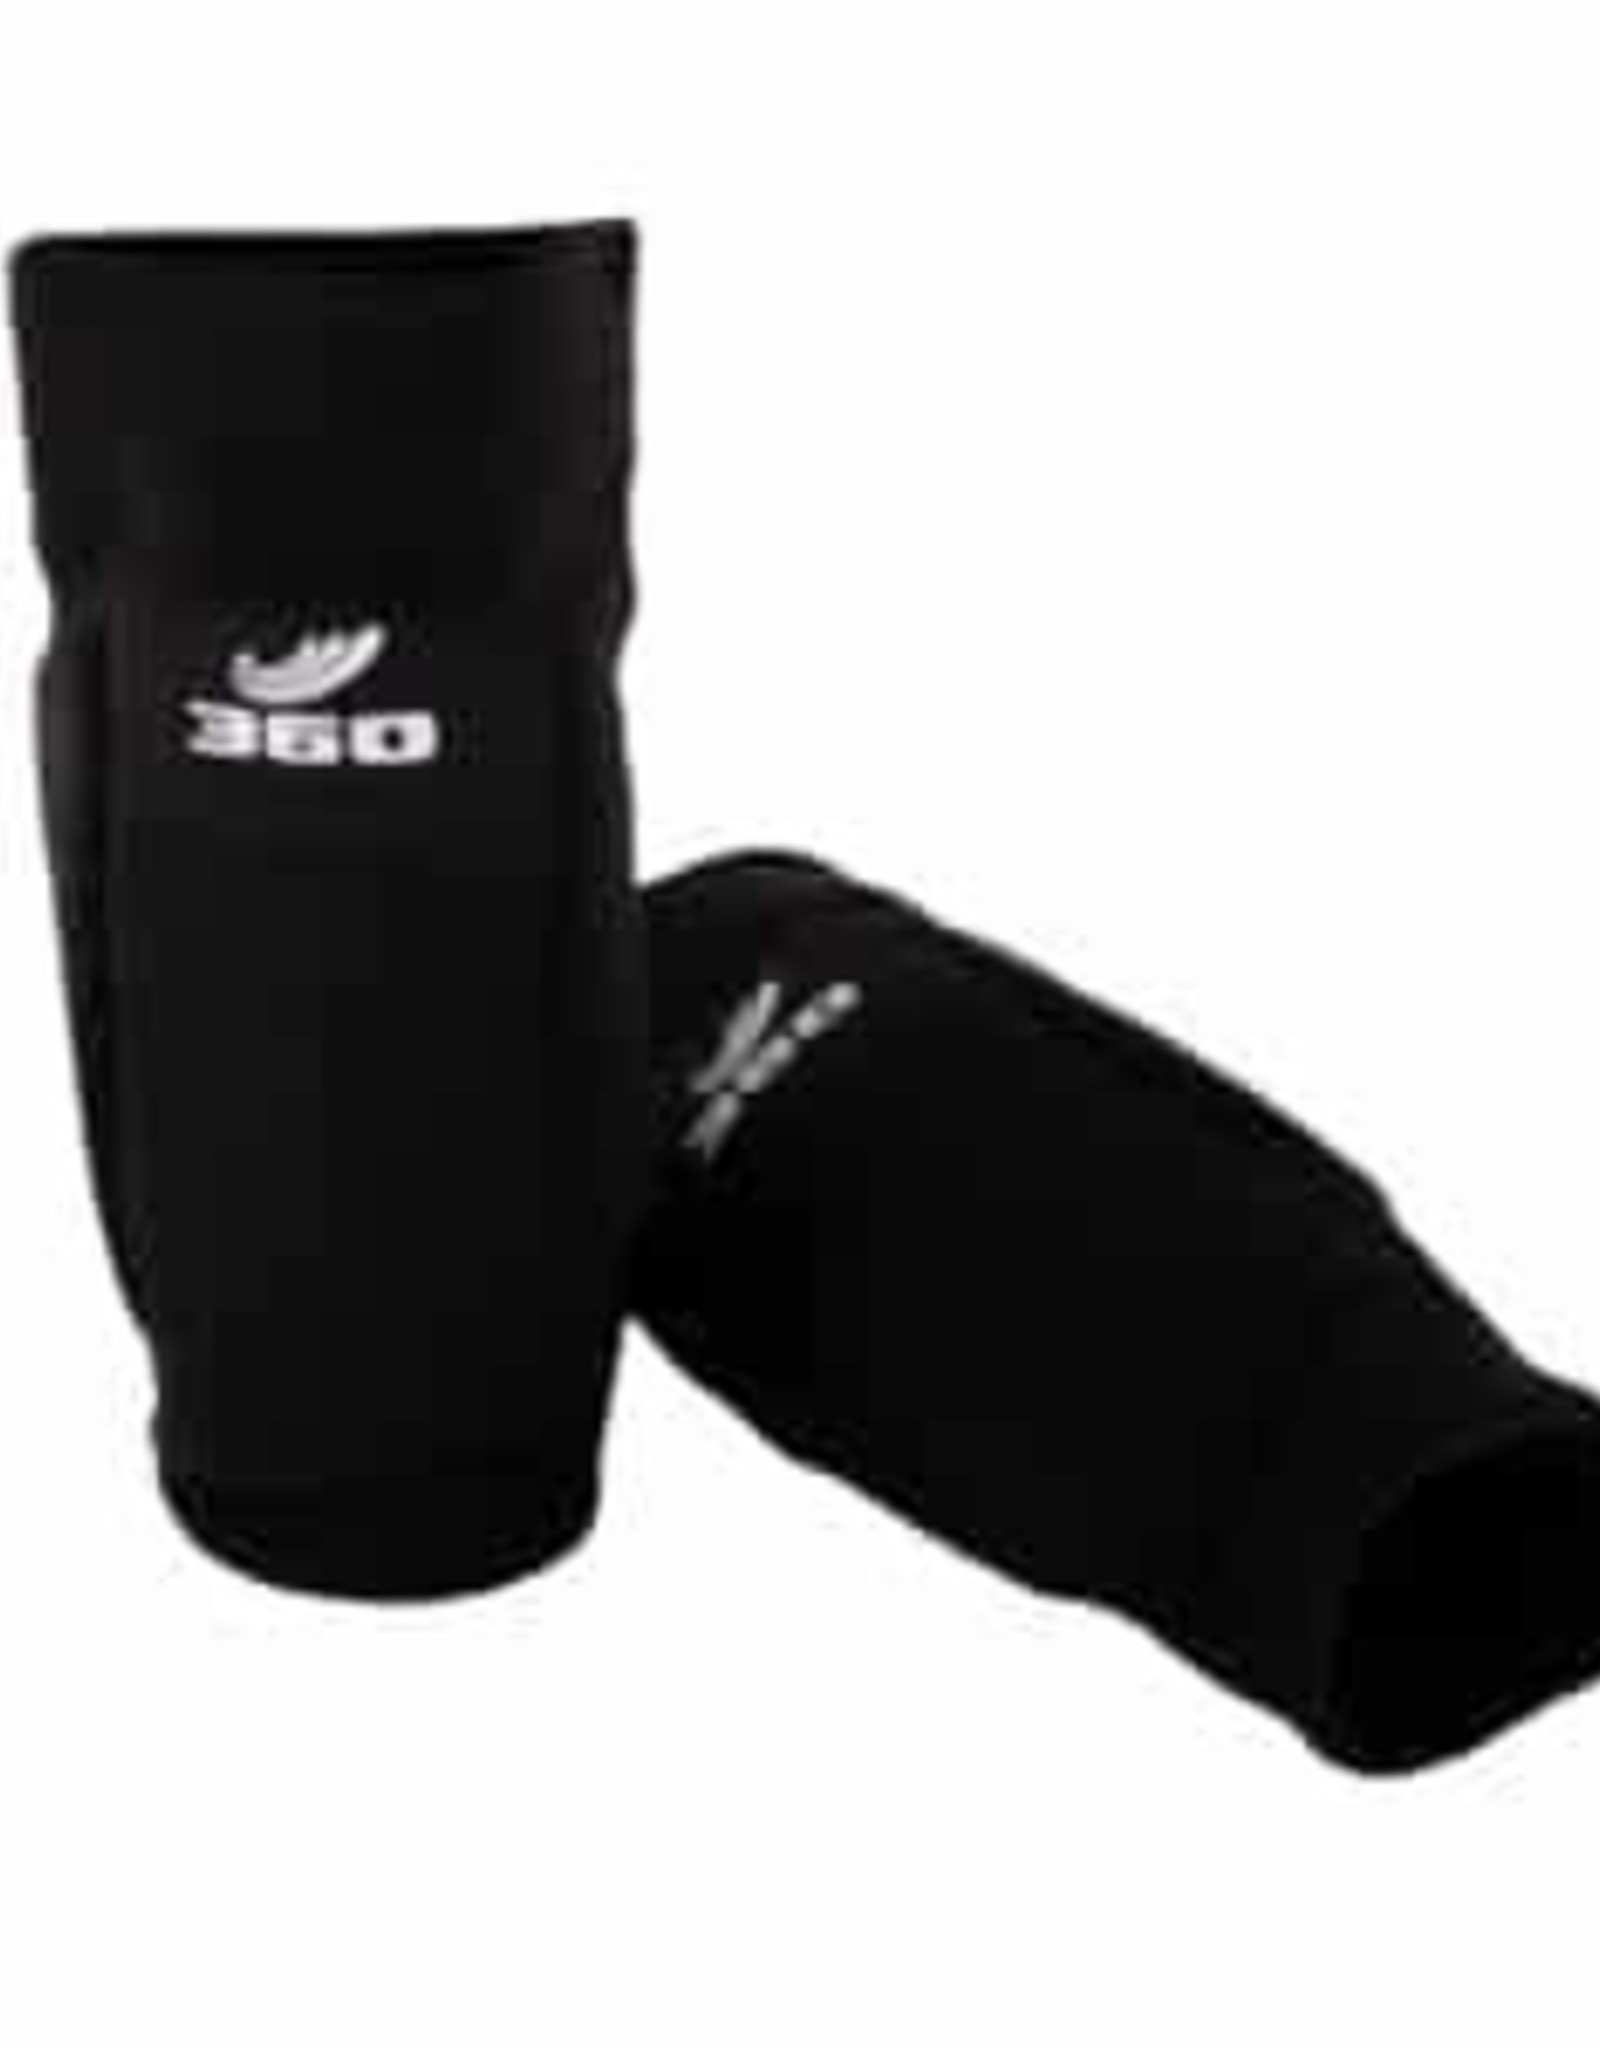 360 Atheletic GENOUILLERES POUR VOLLEYBALL NOIR - GRAND - 110 % SPORT